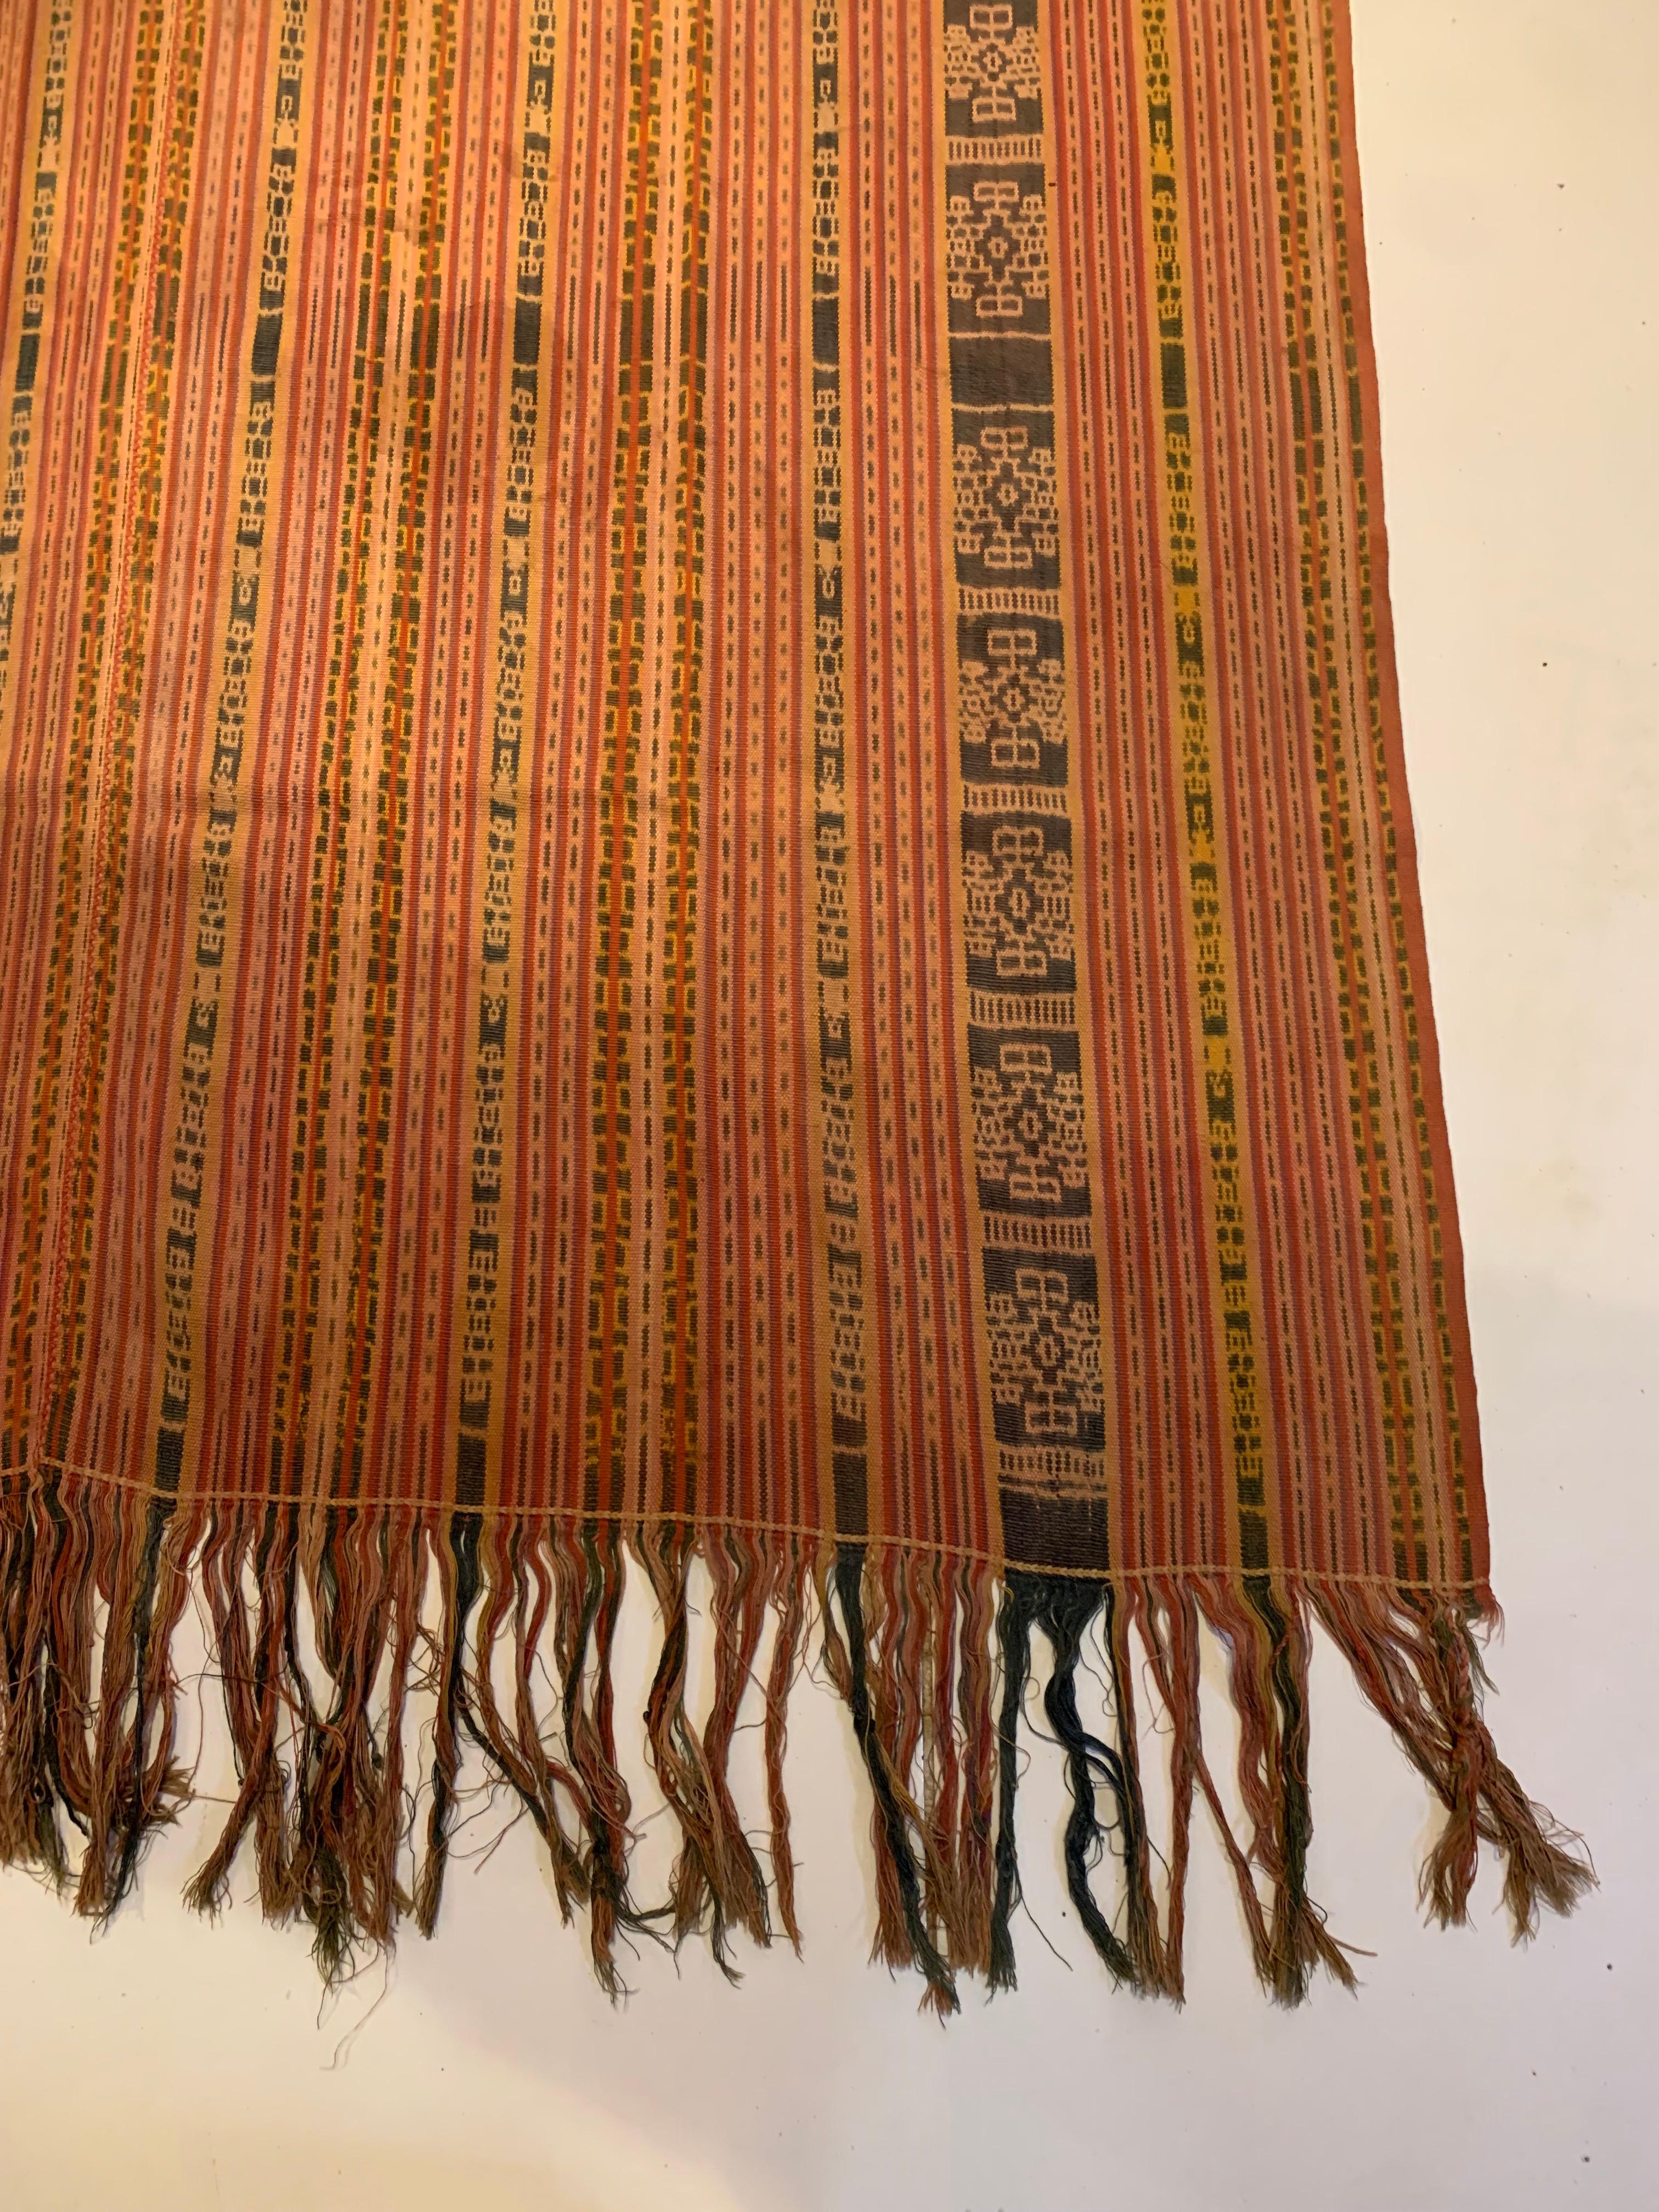 Hand-Woven Rare Ikat Textile from Timor Stunning Tribal Motifs & Colors, Indonesia c. 1900 For Sale